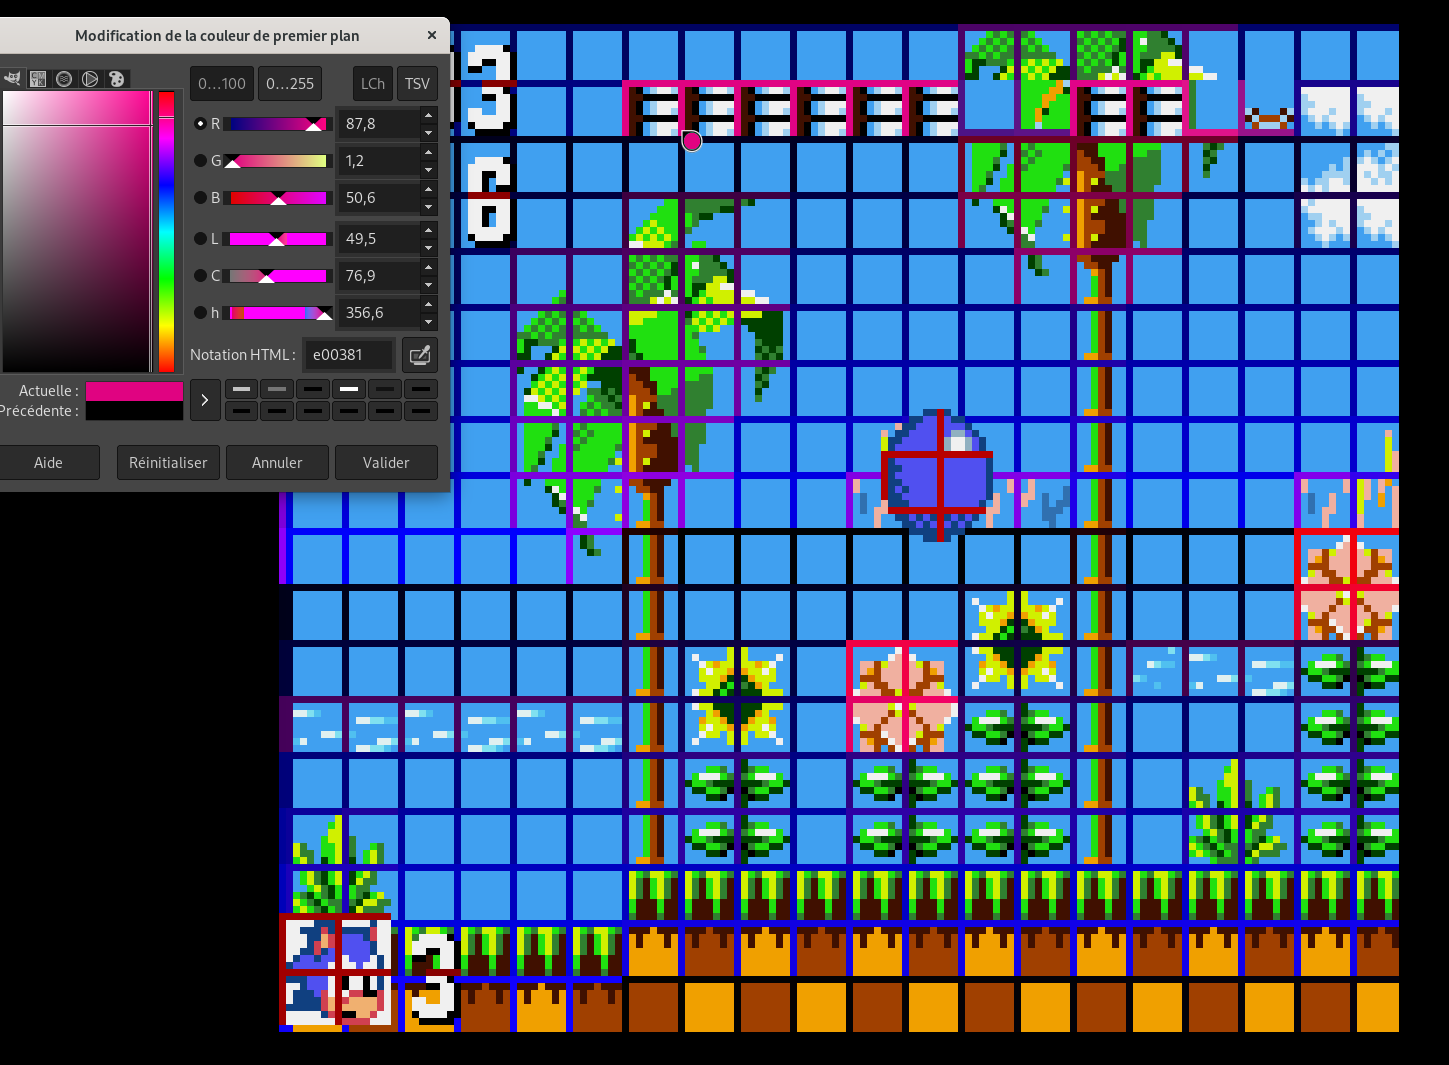 Screenshot of a game gear emulator showing sonic 1 game screen, with a grid of various colors for background and sprites.
A color tool from the gimp is measuring border color to get encoded information like pattern number, or background coordinates.